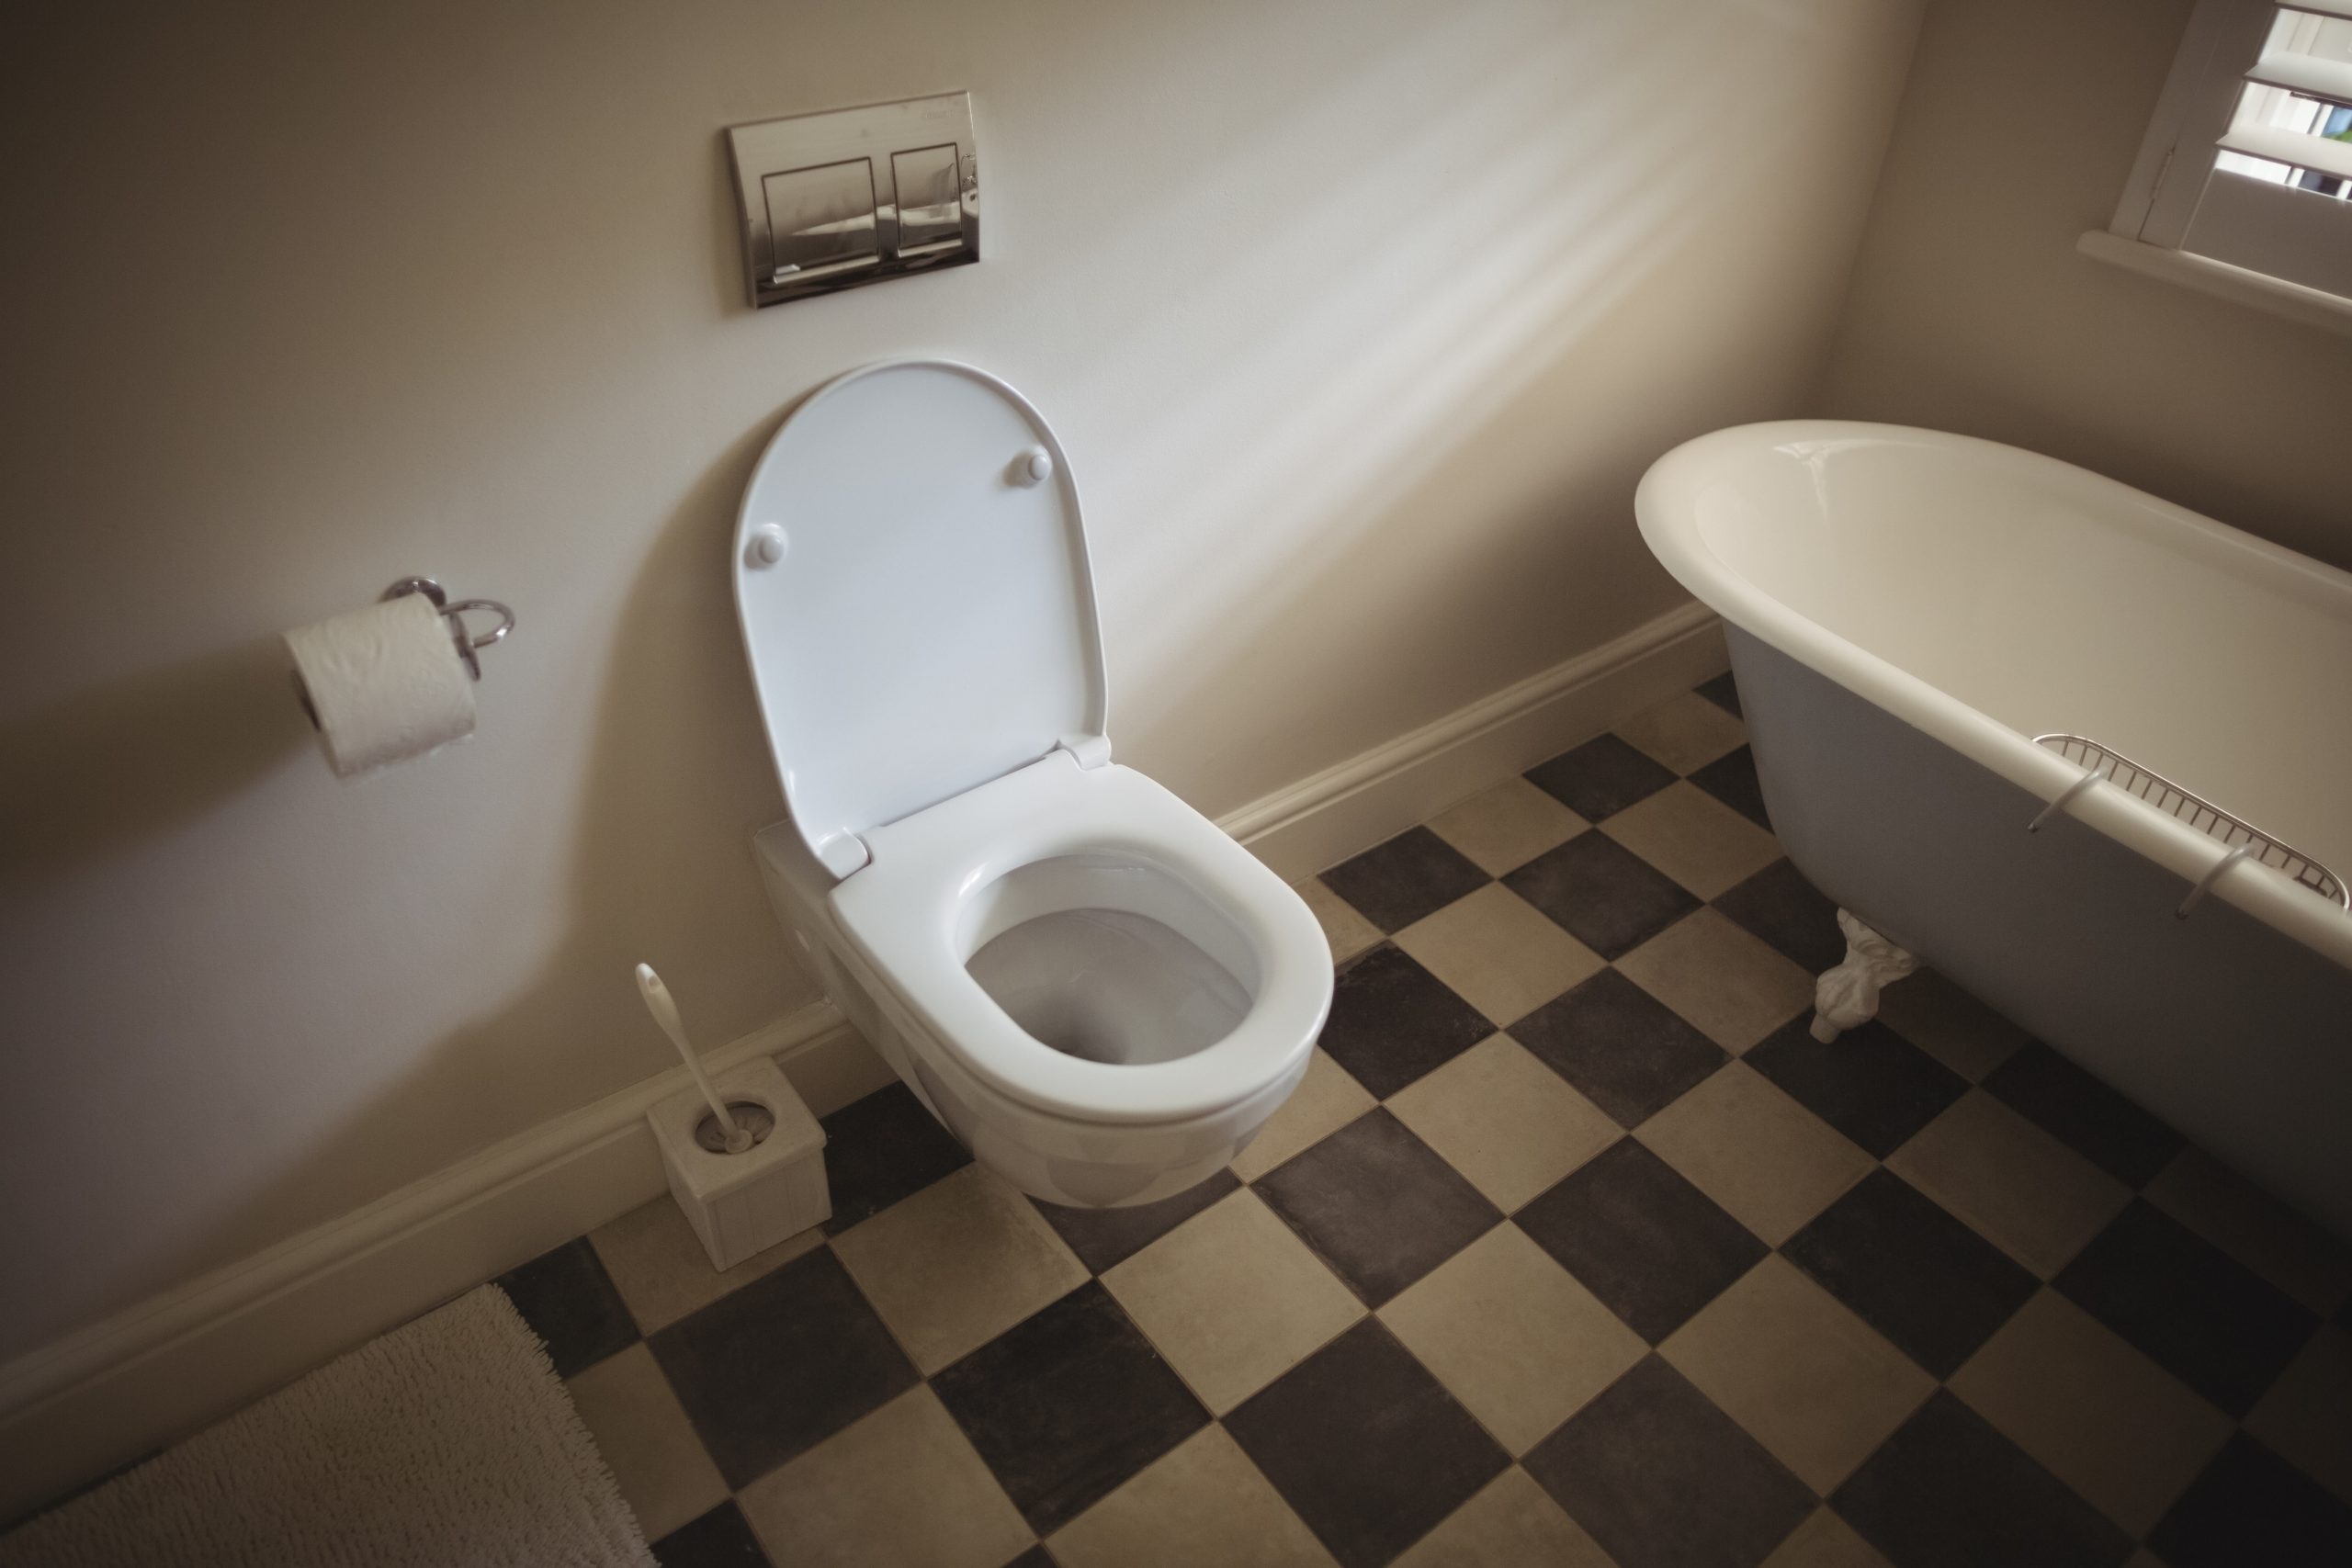 Toilet Troubles? Cummings Plumbing Offers Helpful Advice for Assessing Common Toilet Plumbing Issues